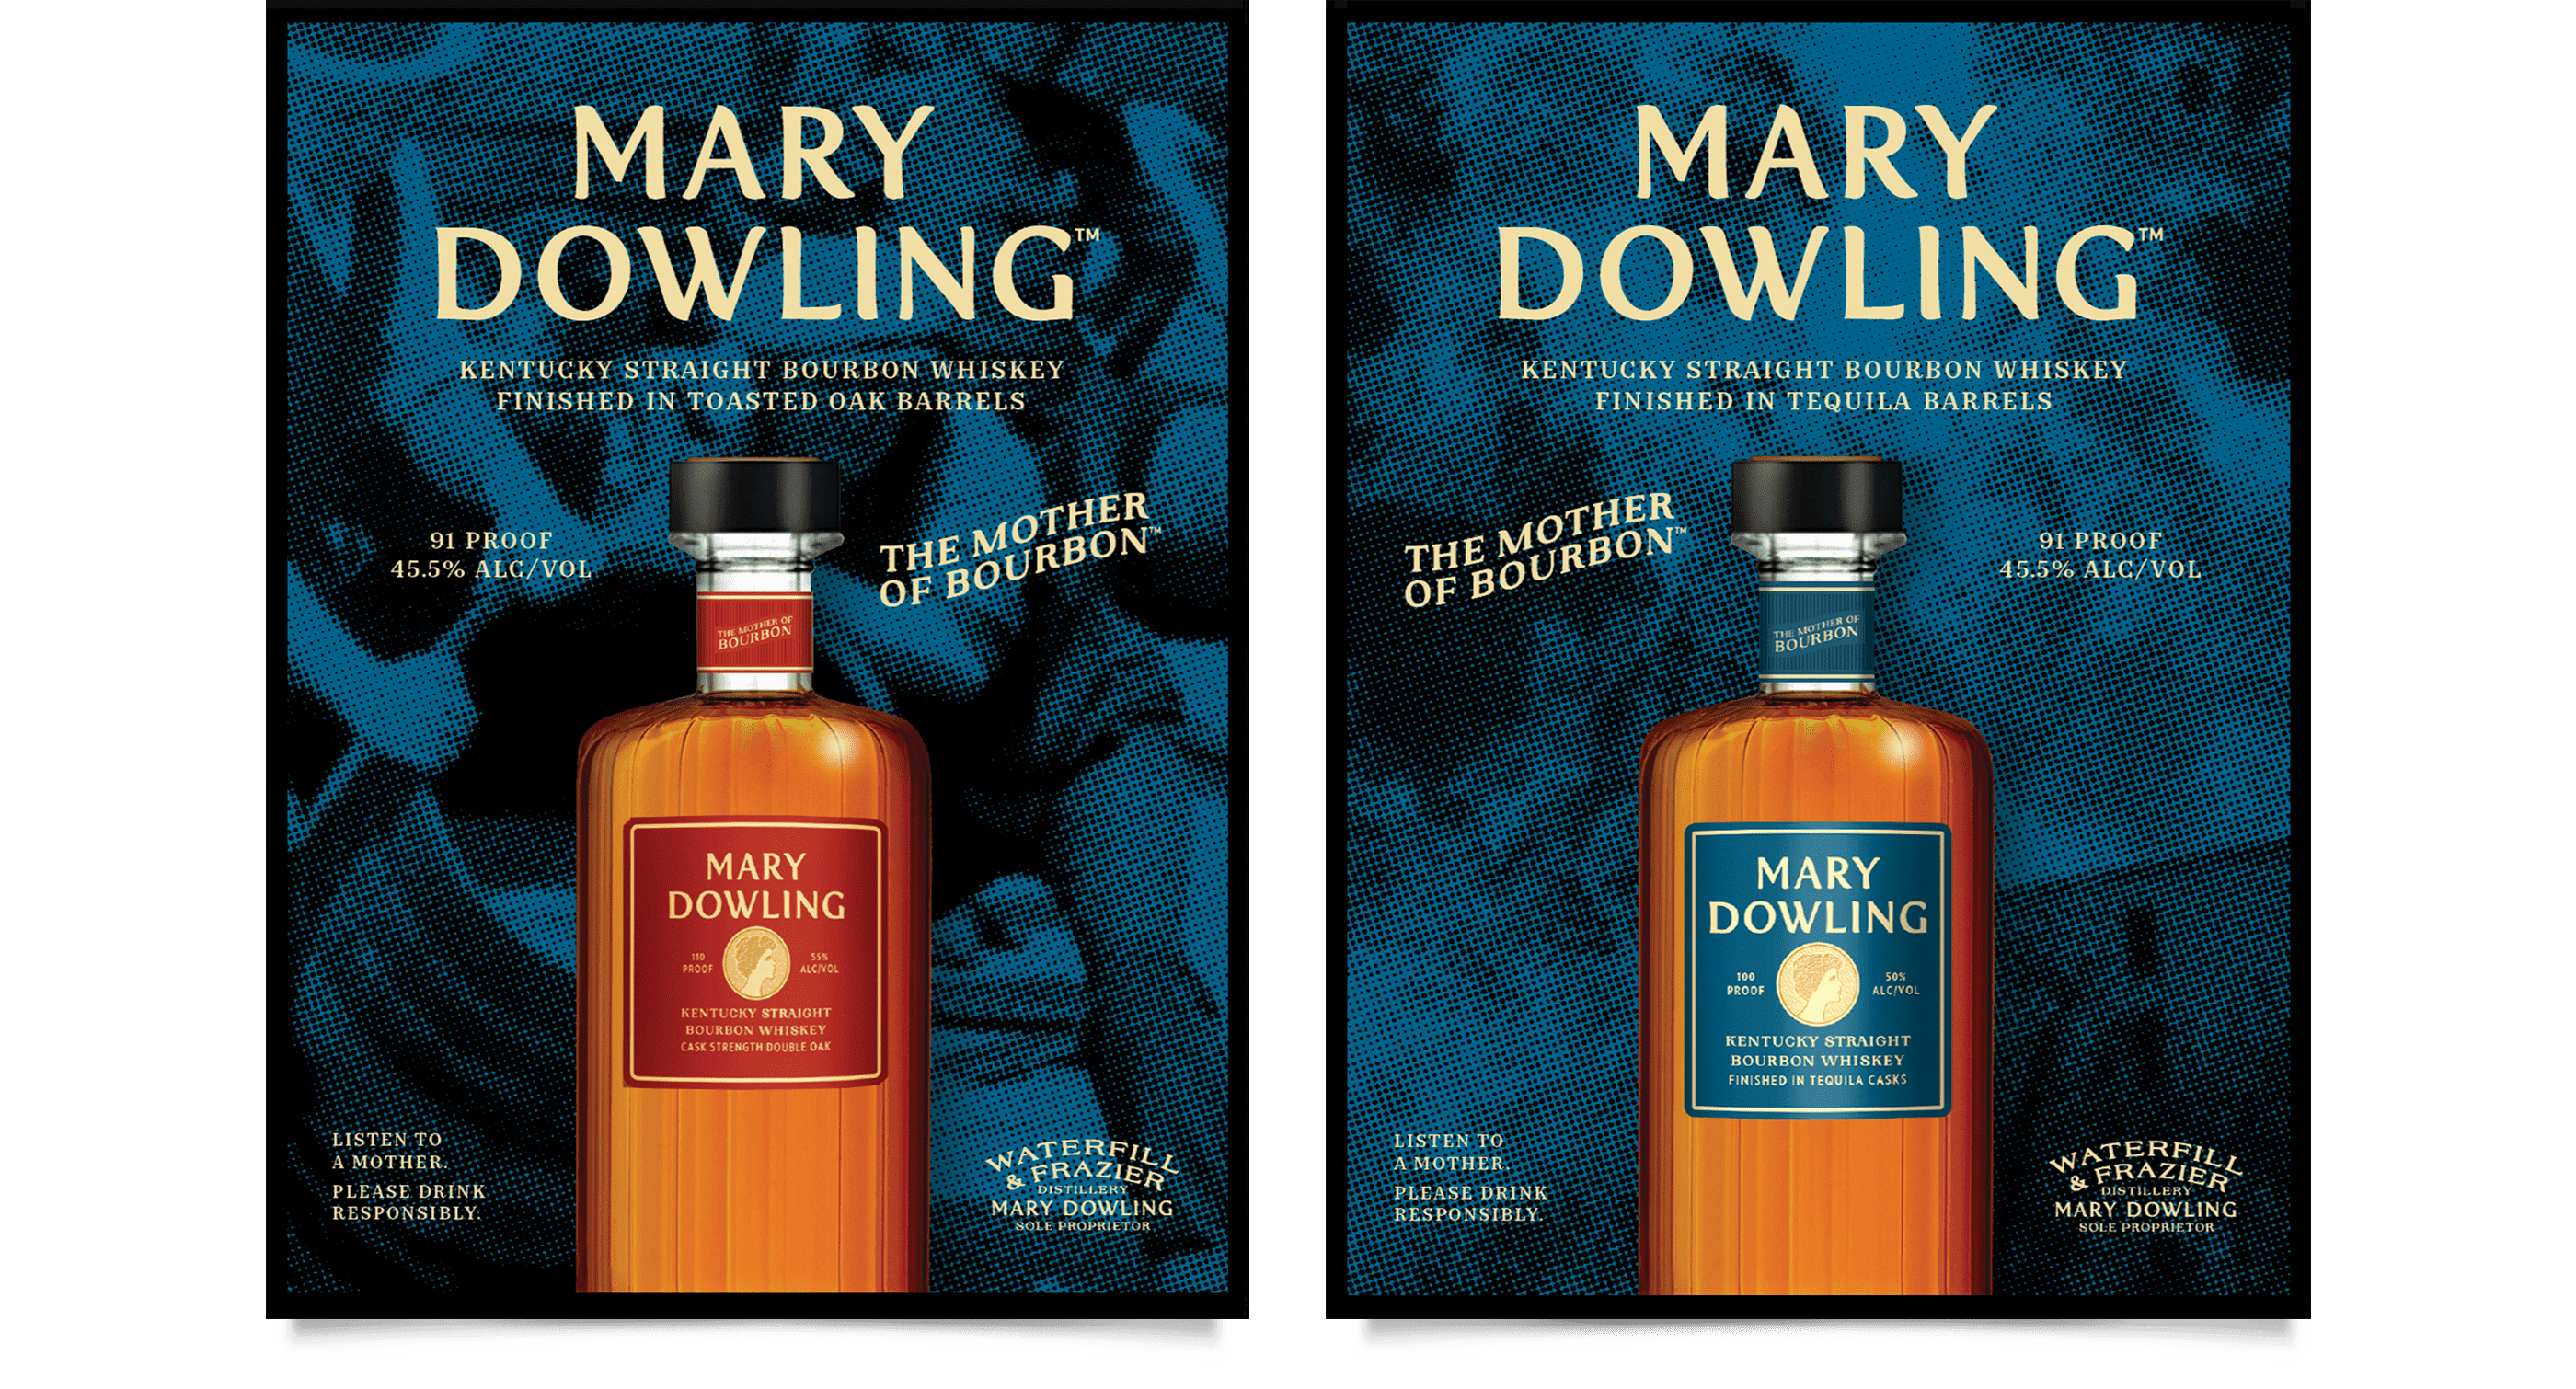 Mary Dowling print ads